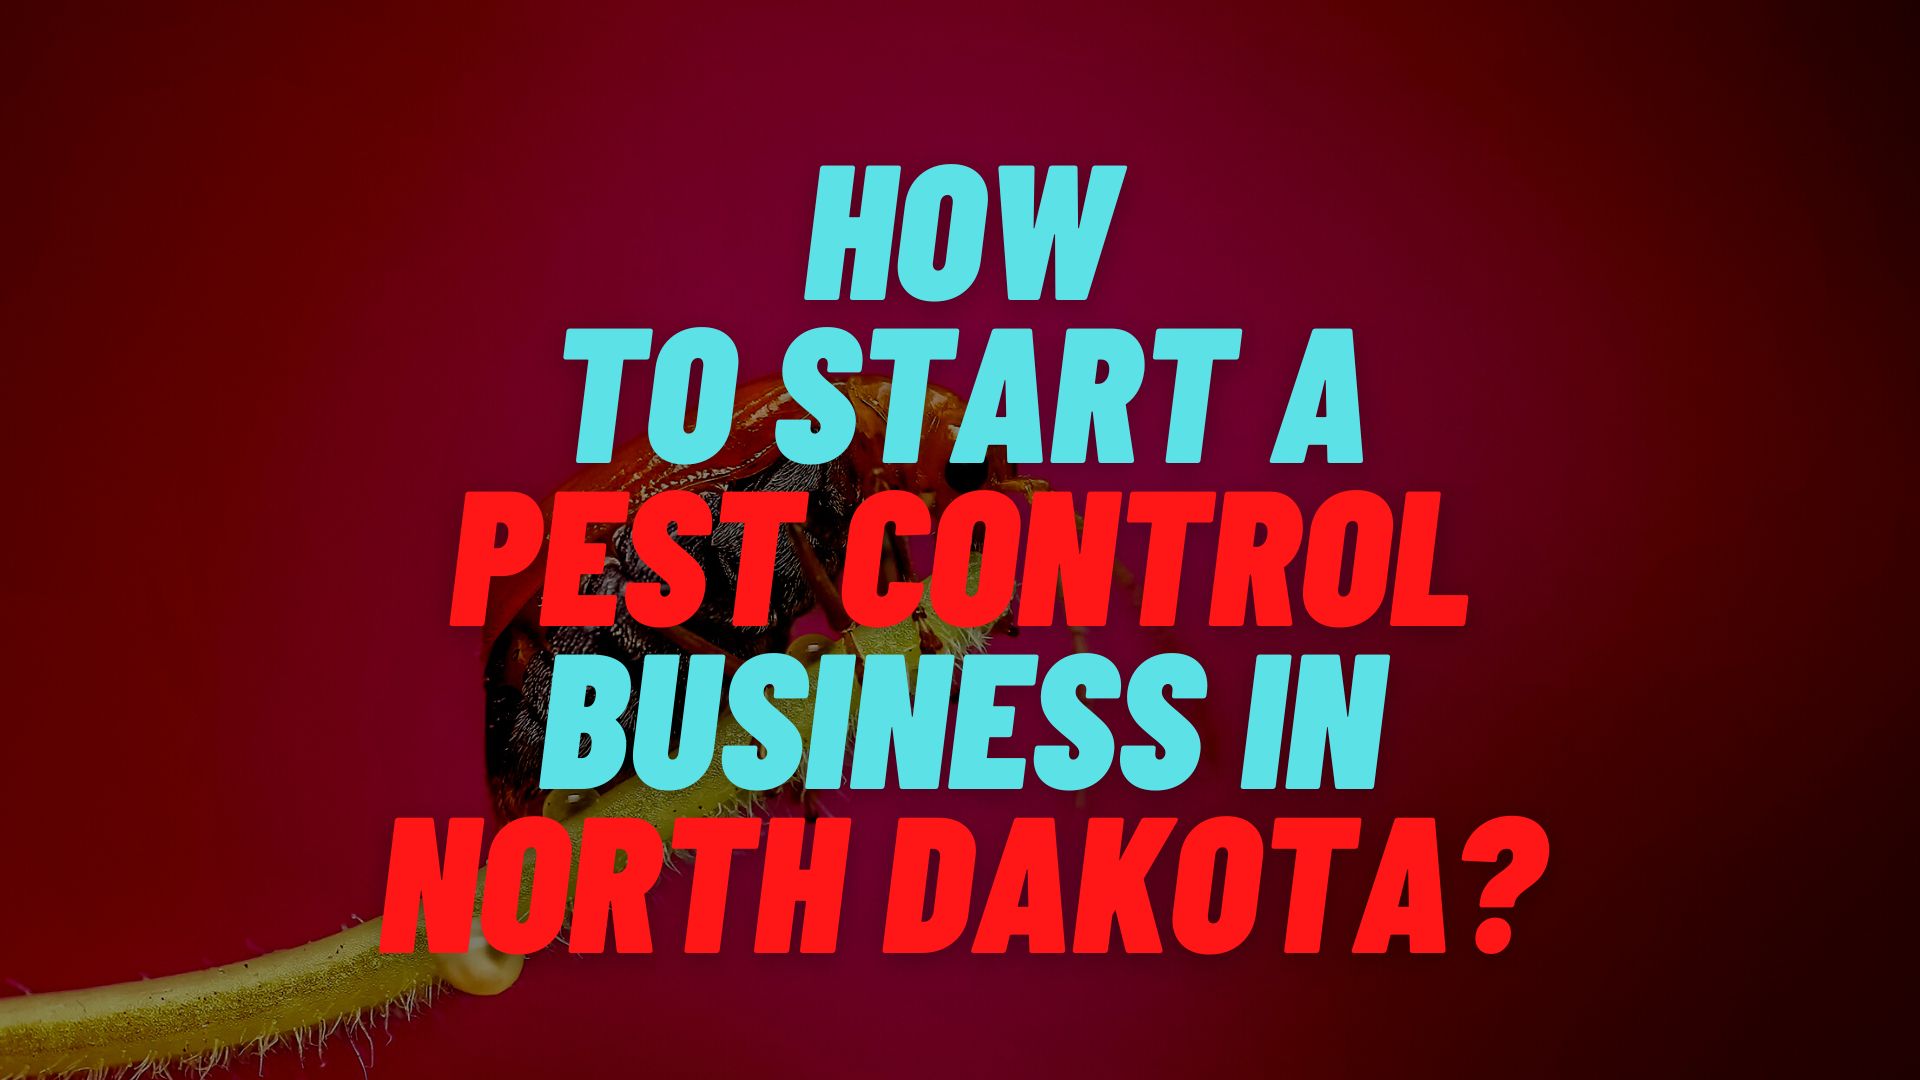 How to start a pest control business in North Dakota?